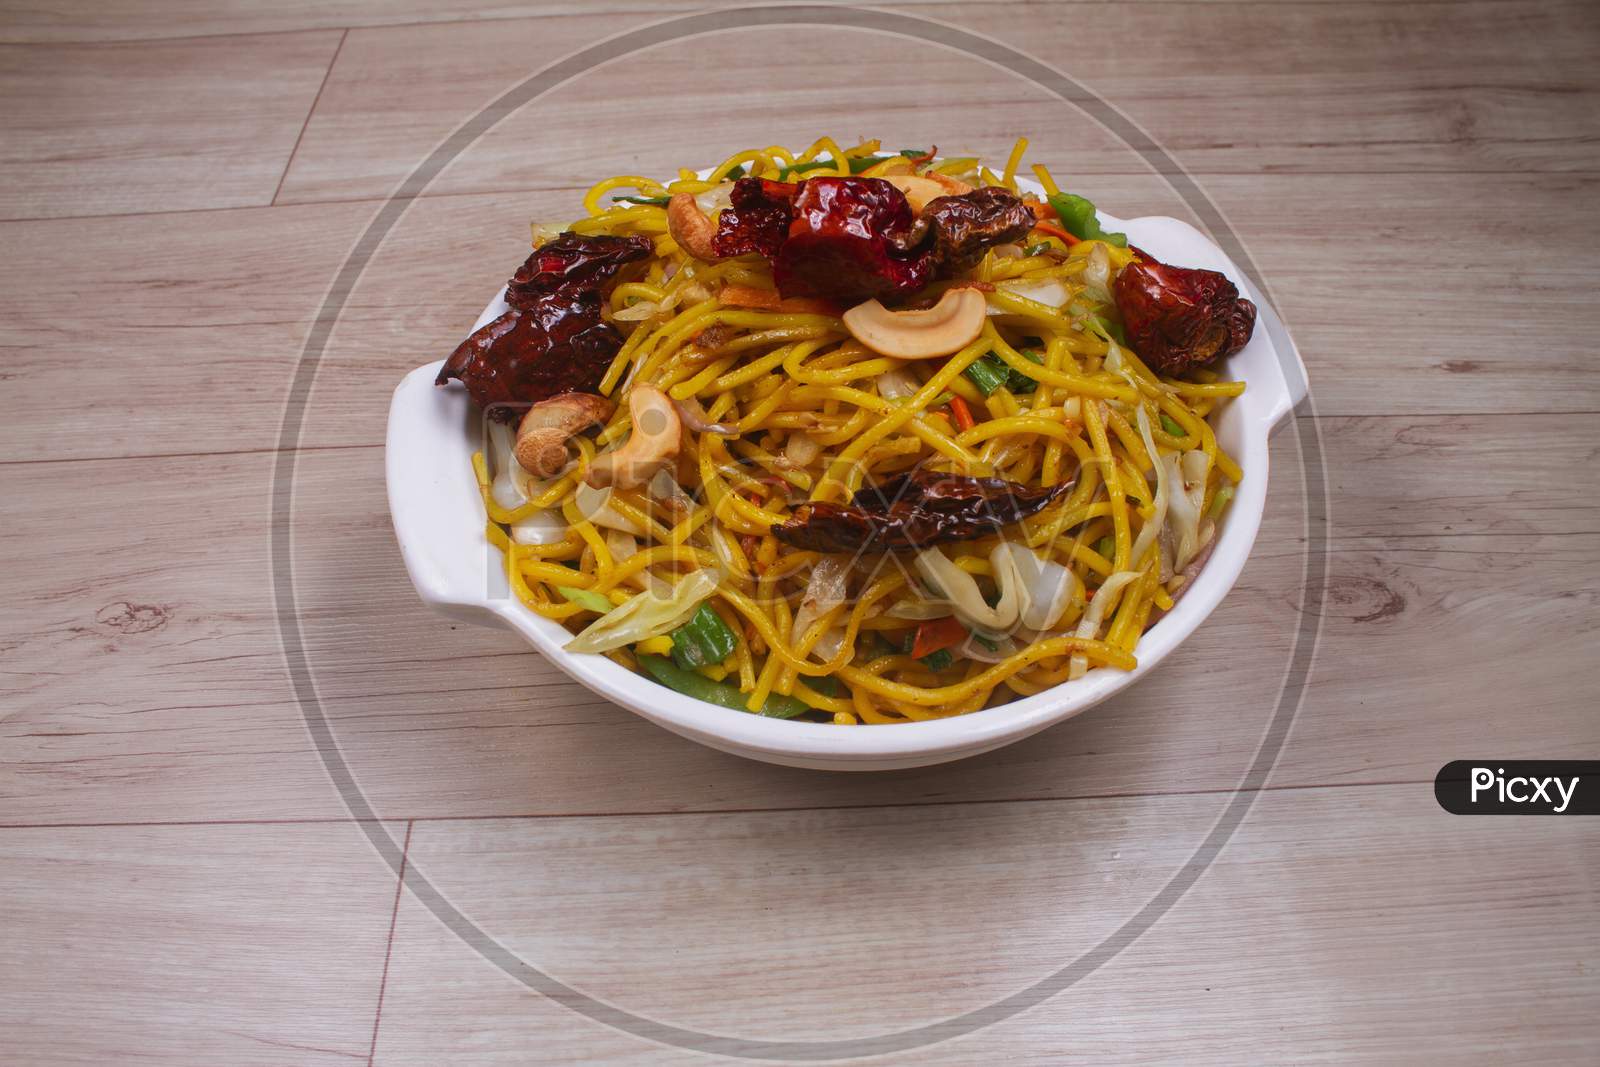 Egg Noodles With Barbeque Pork On Chinese Plates On A Wooden Table And Garnish